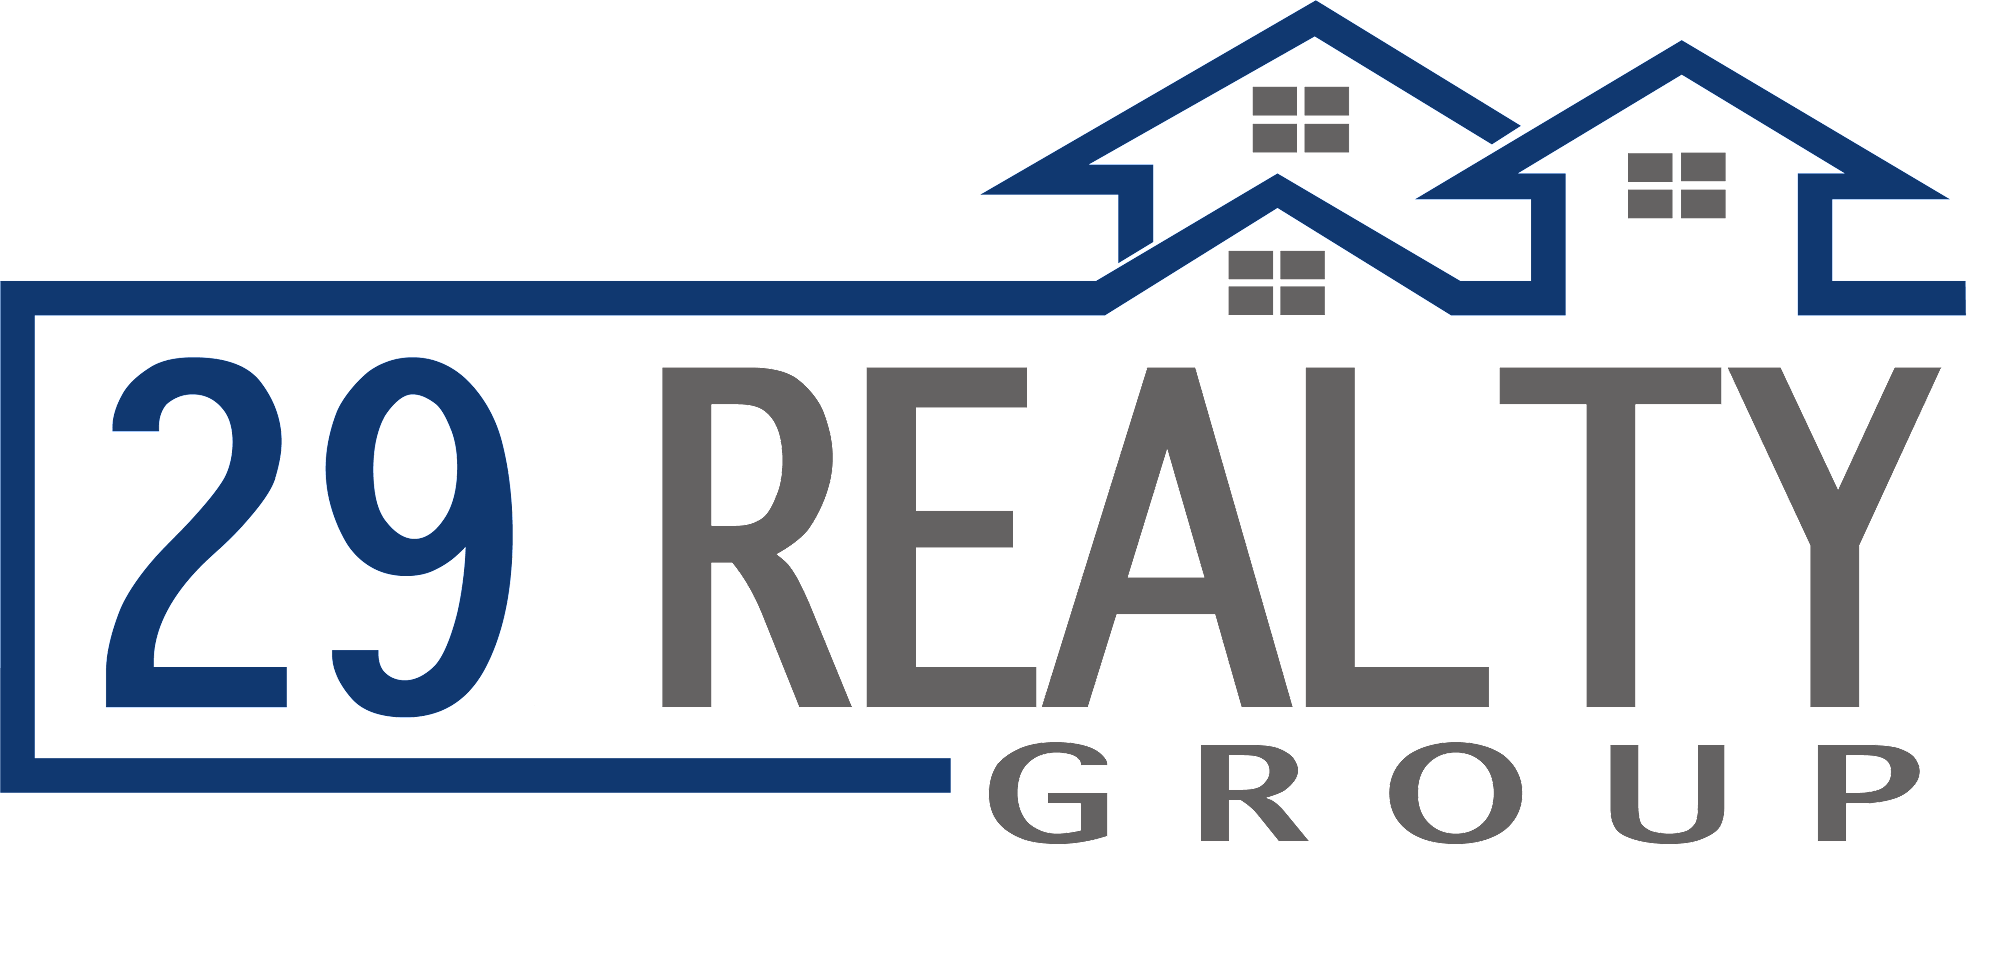 29 Realty Group